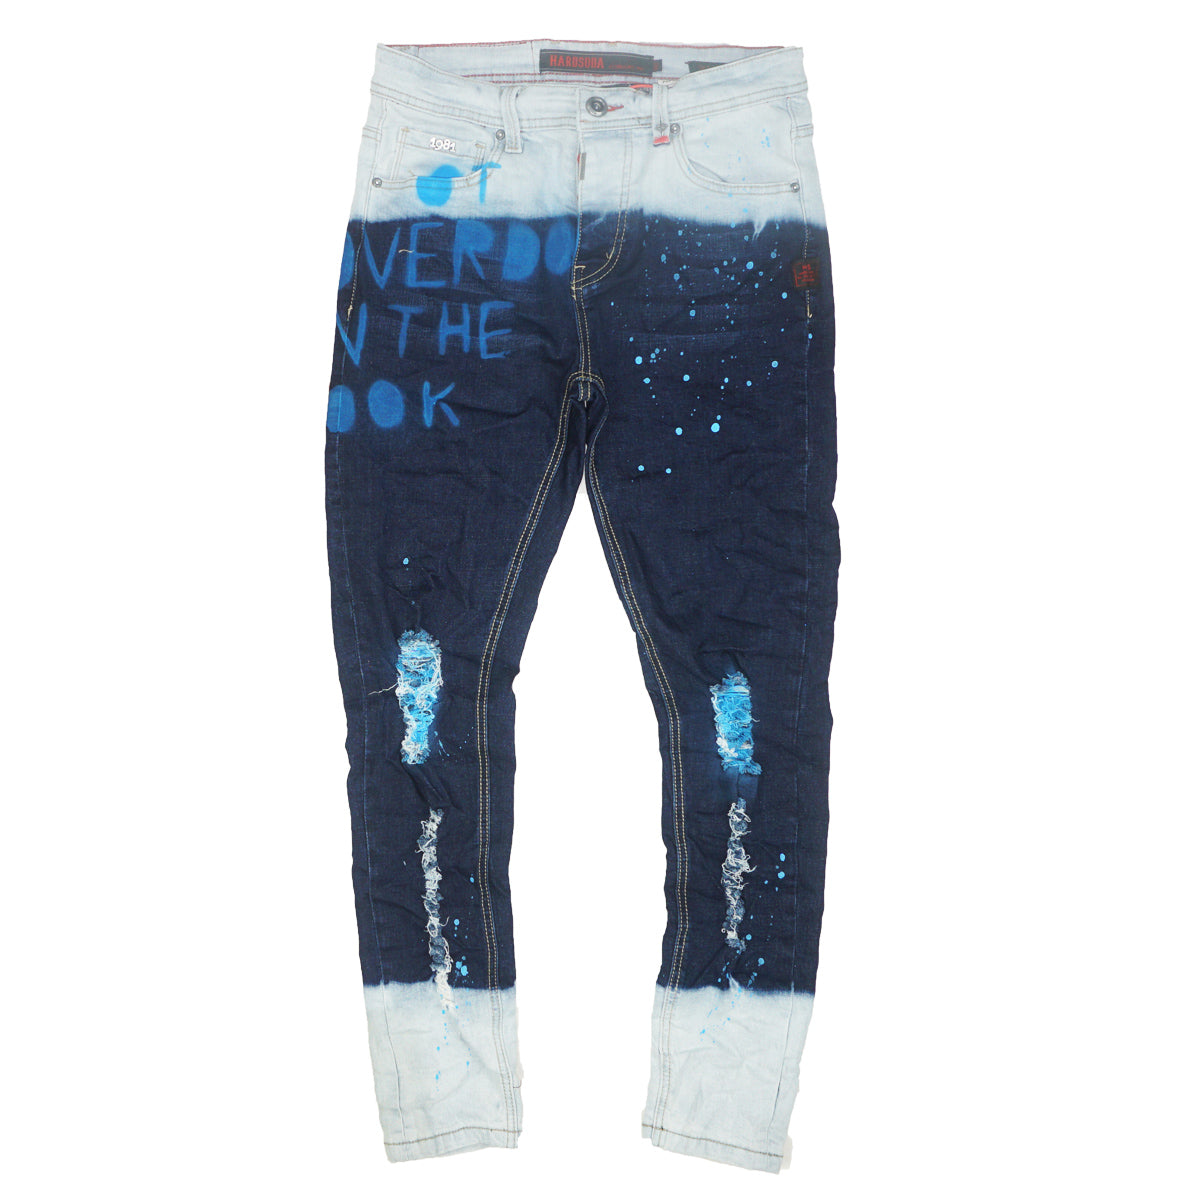 The Look Denim ( Blue / Whte / Red ) / C3